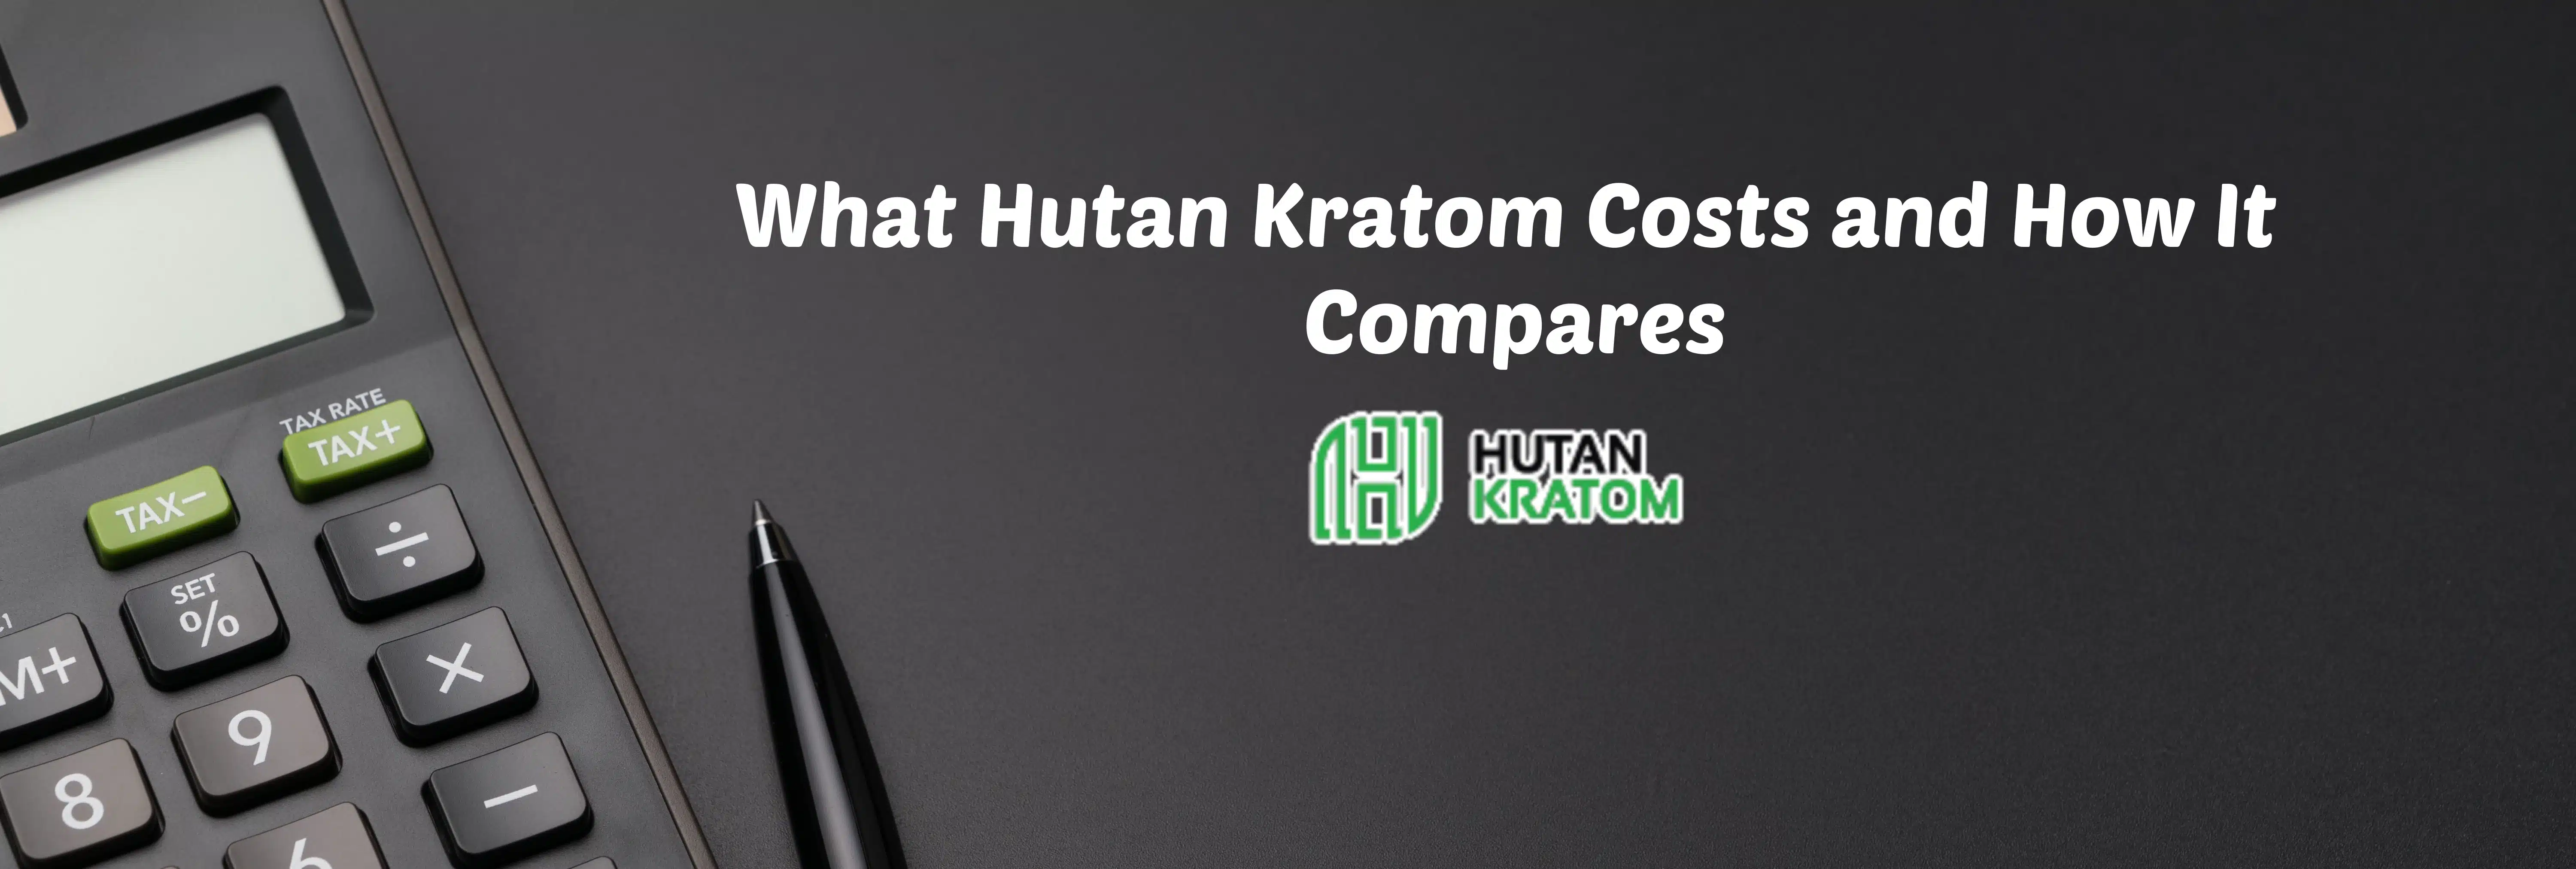 "What hutan kratom costs and how it compares" banner and logo